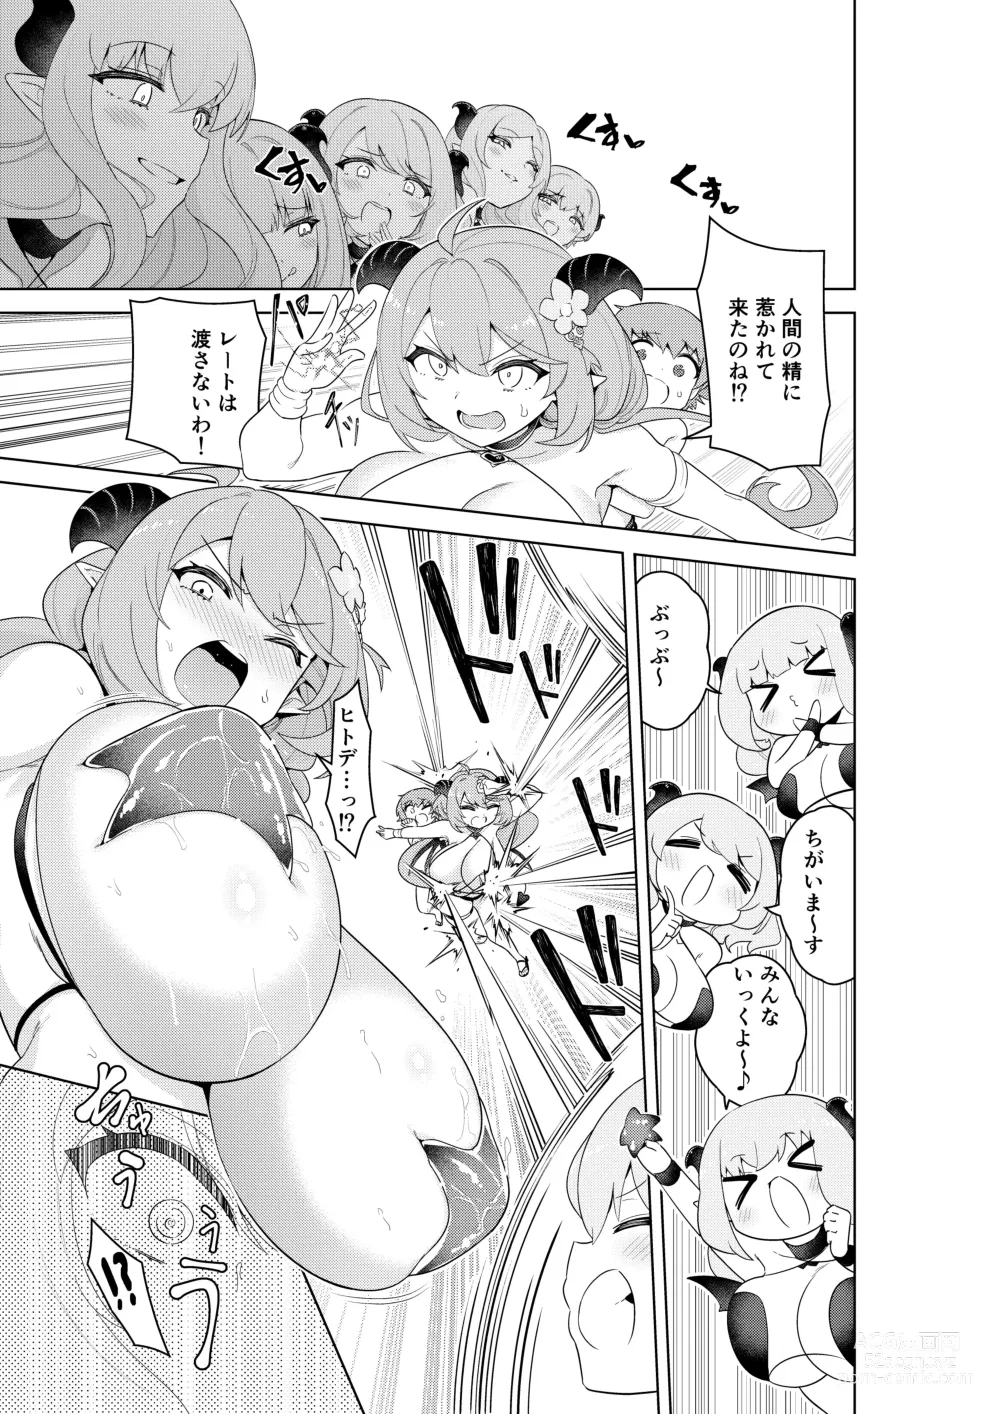 Page 56 of doujinshi Succubus in Wonderland: Comicalize!